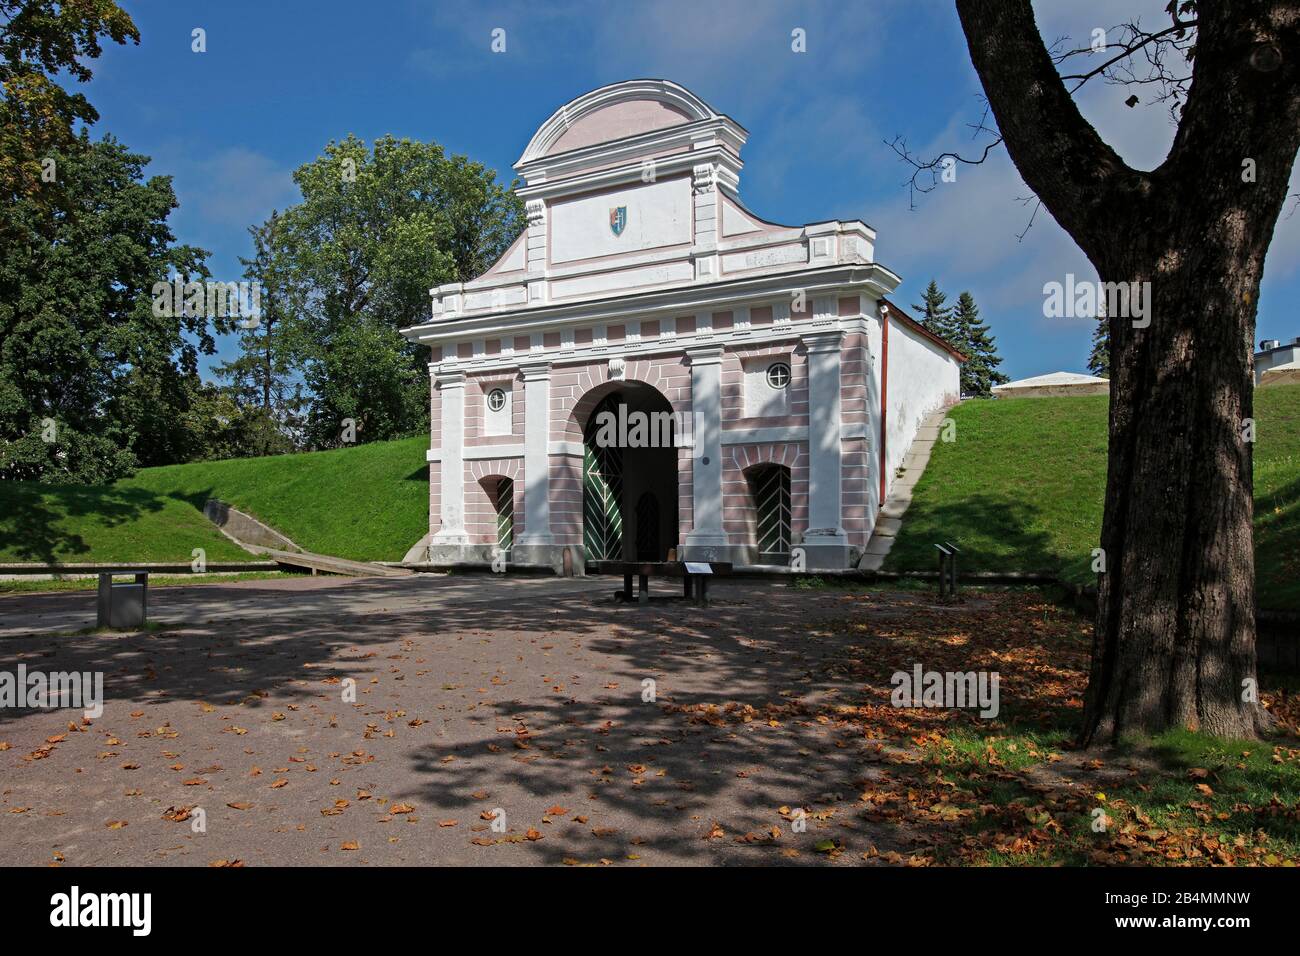 Baltic States, Estonia, Pärnu, Tallinn Gate, built 1675-86, baroque style, the only remaining gate of the Swedish ramparts of the 17th century, which were leveled in the 19th century and replaced by a park. Stock Photo